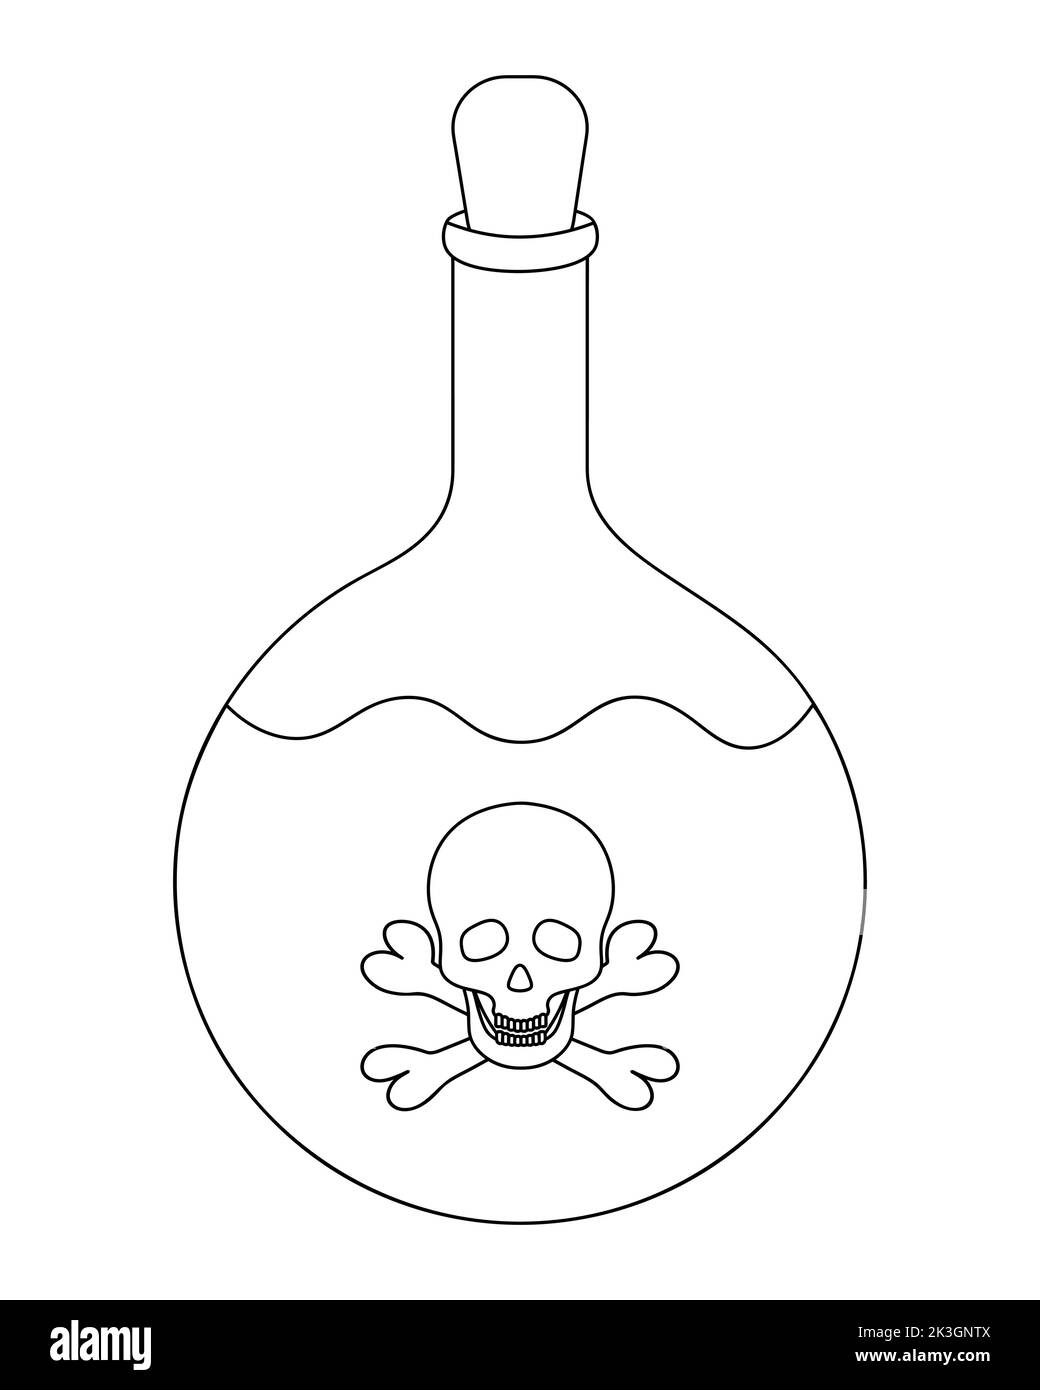 Poison bottle. The emblem on the bottle is skull and bones. Vector illustration. Outline on an isolated white background. Doodle style. Sketch. Stock Vector